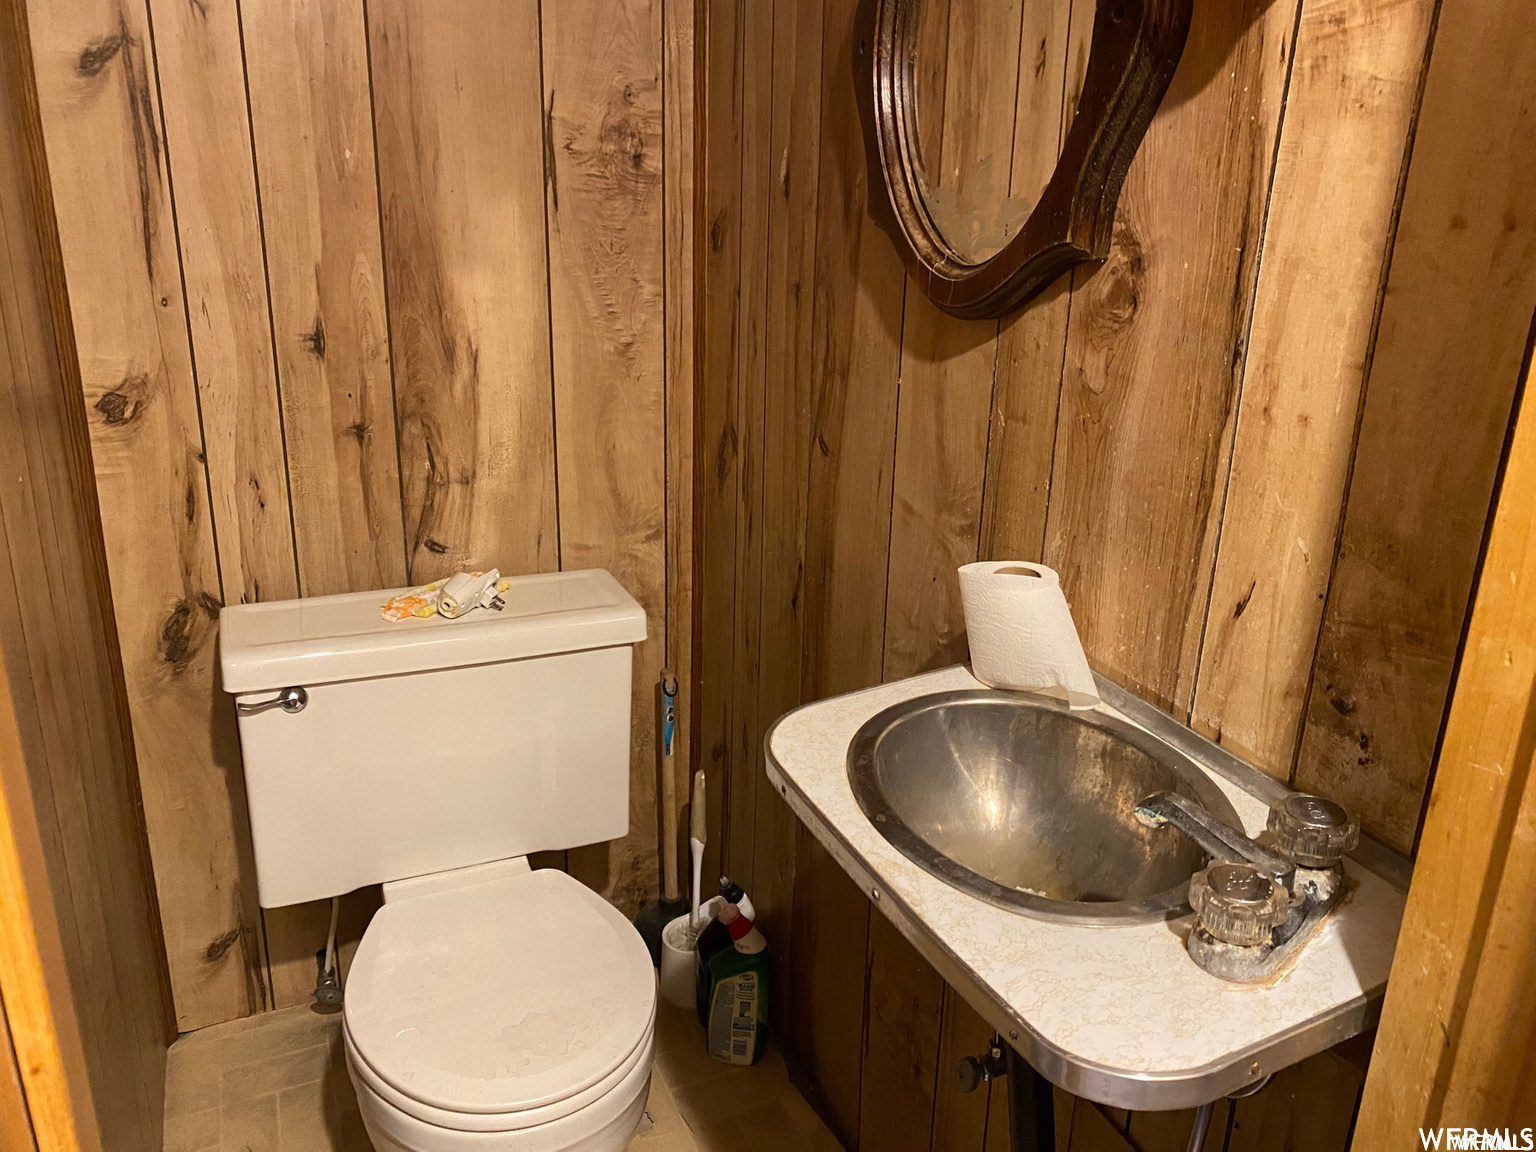 Bathroom featuring wood walls and toilet